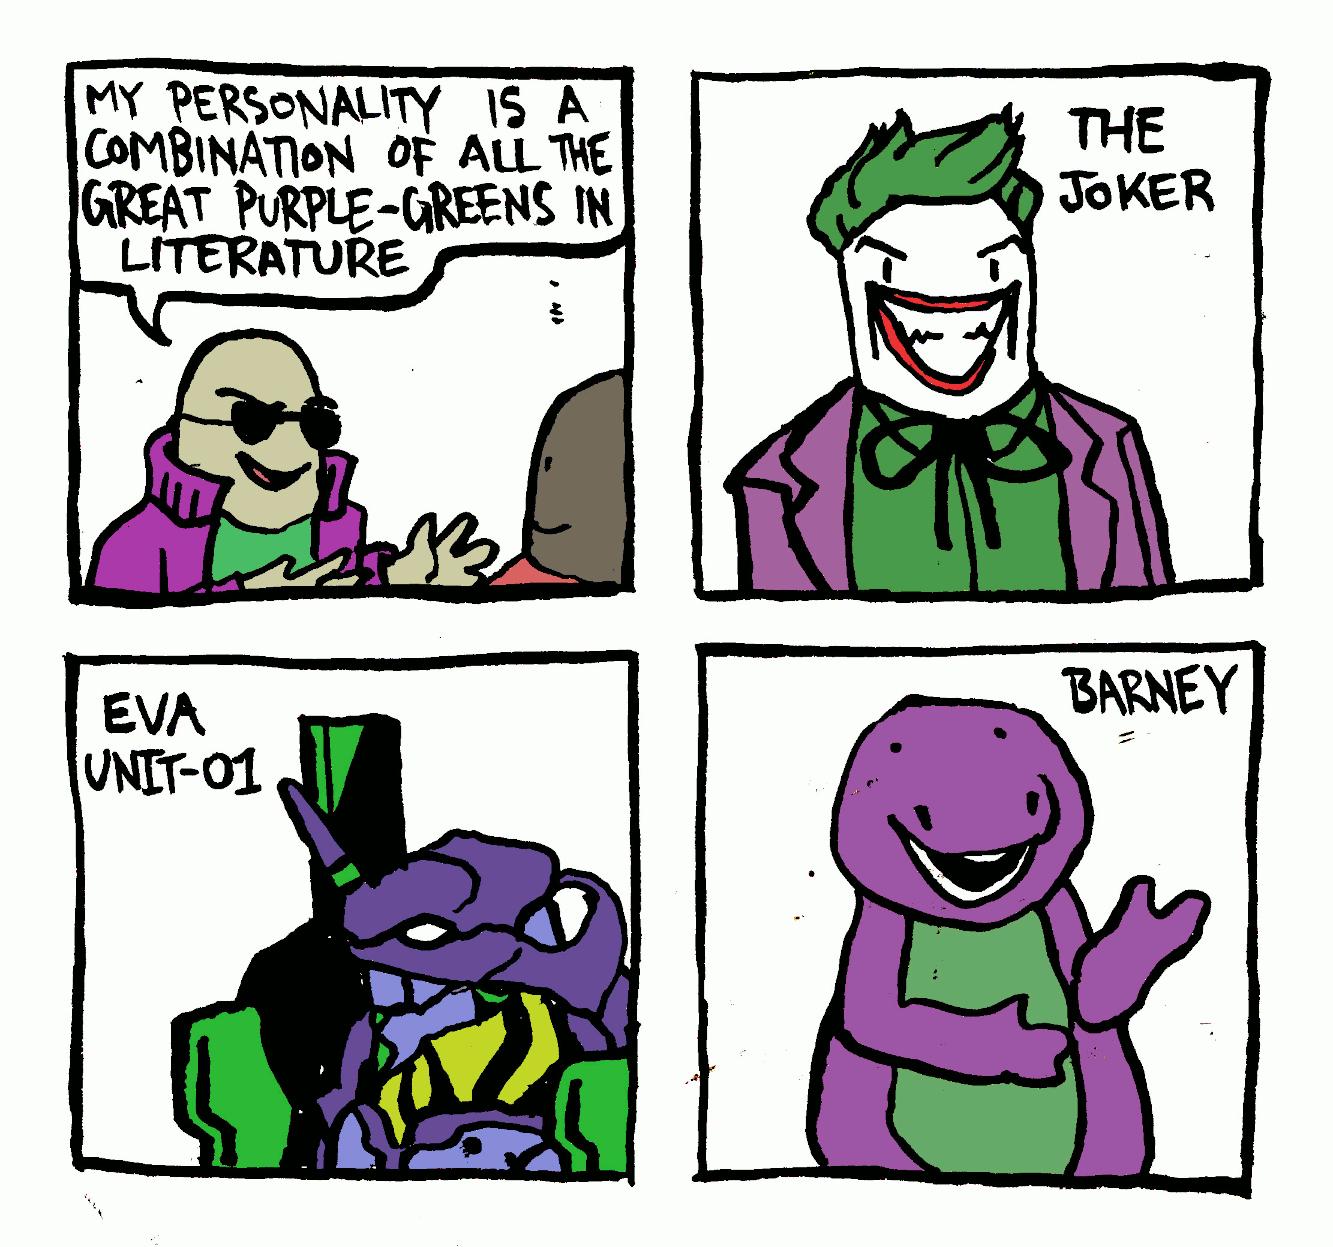 joker eva unit 01 barney the dinosaur personality is a combination of all in literature purple green thanks doc daily dose